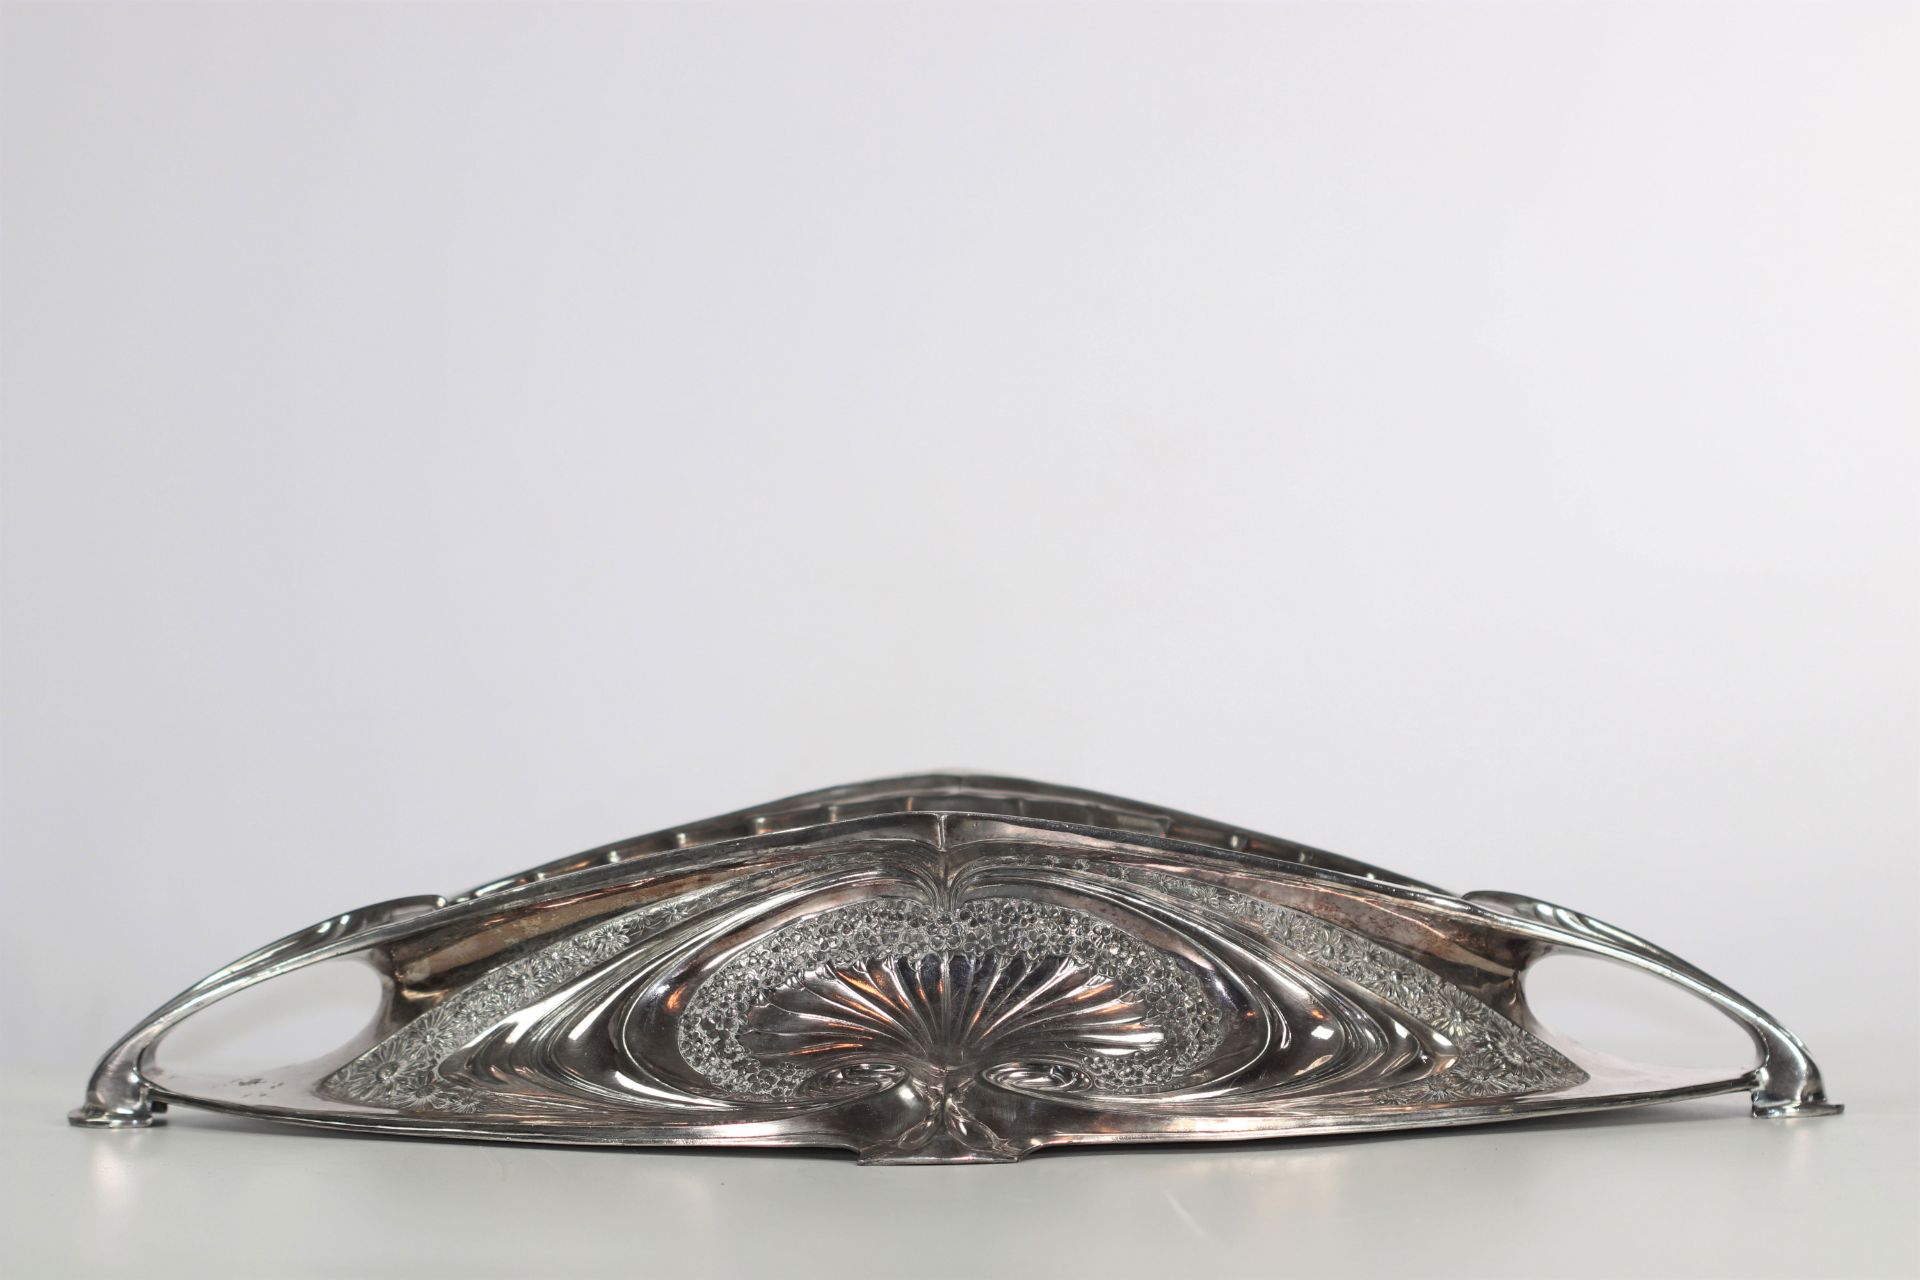 Art Nouveau silver-plated planter, probably WMF, Germany, circa 1900 - Image 3 of 4